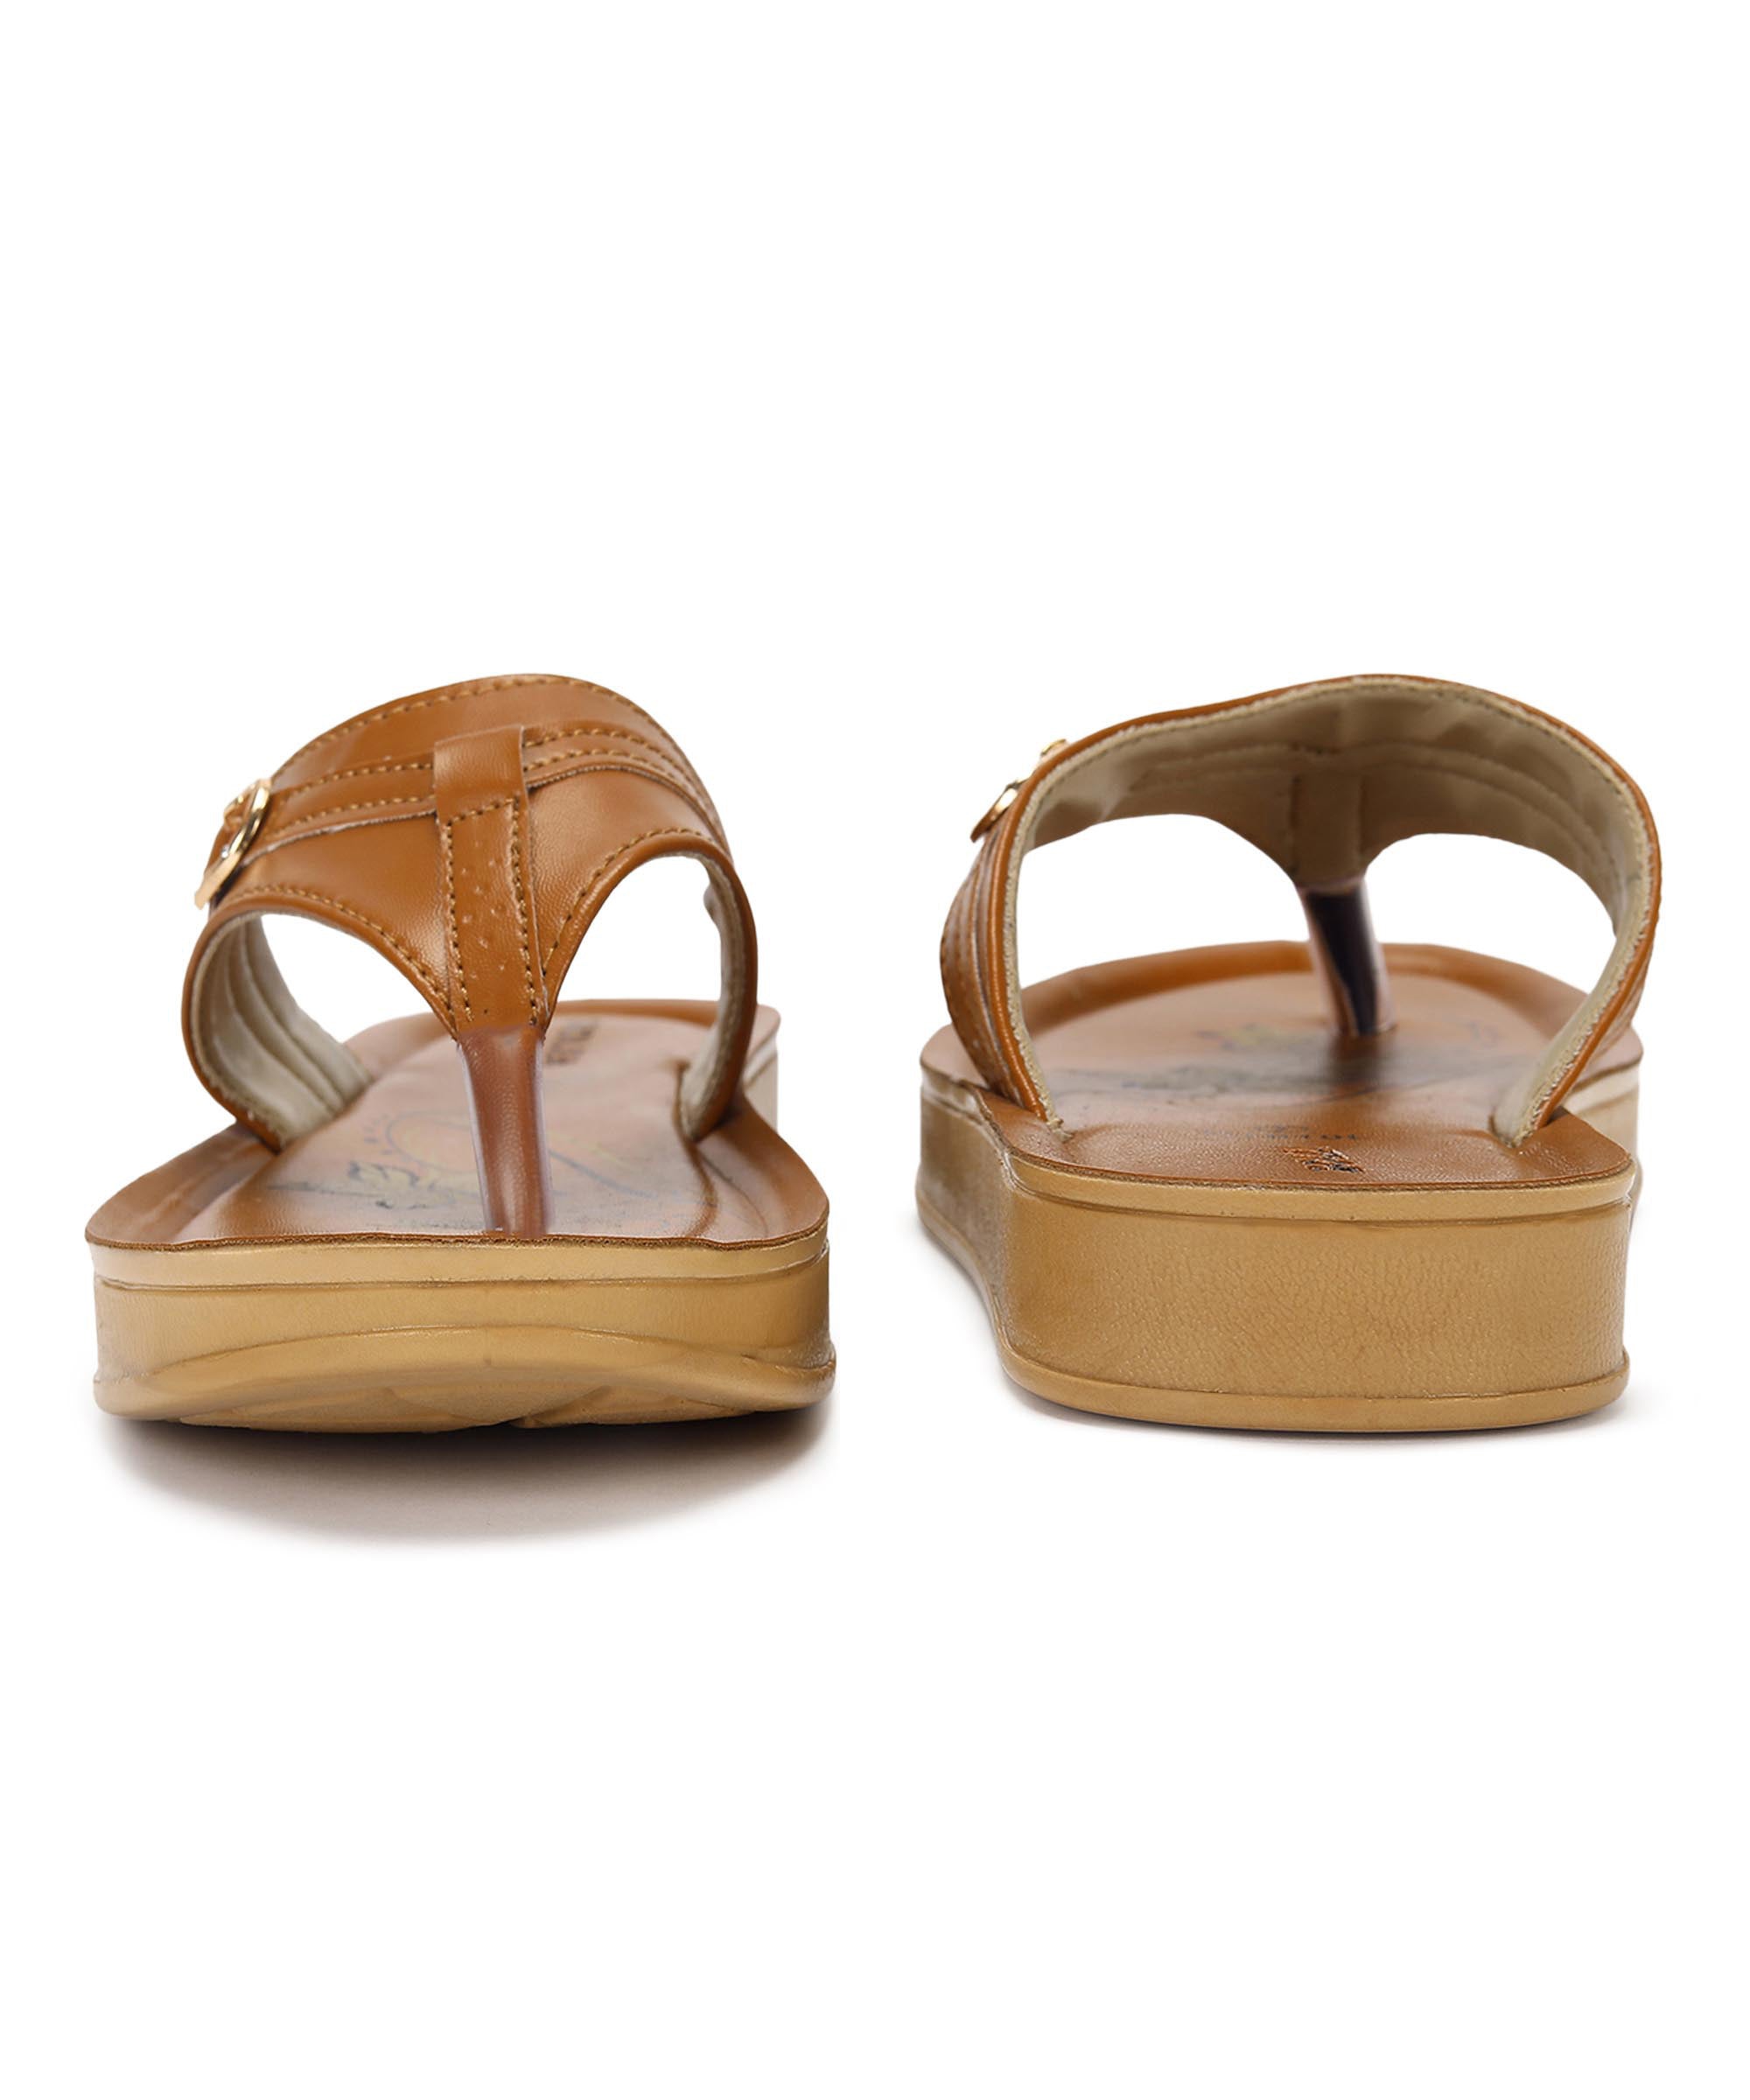 Strap In Style & Discover the Best Sandals for Women – Paragon